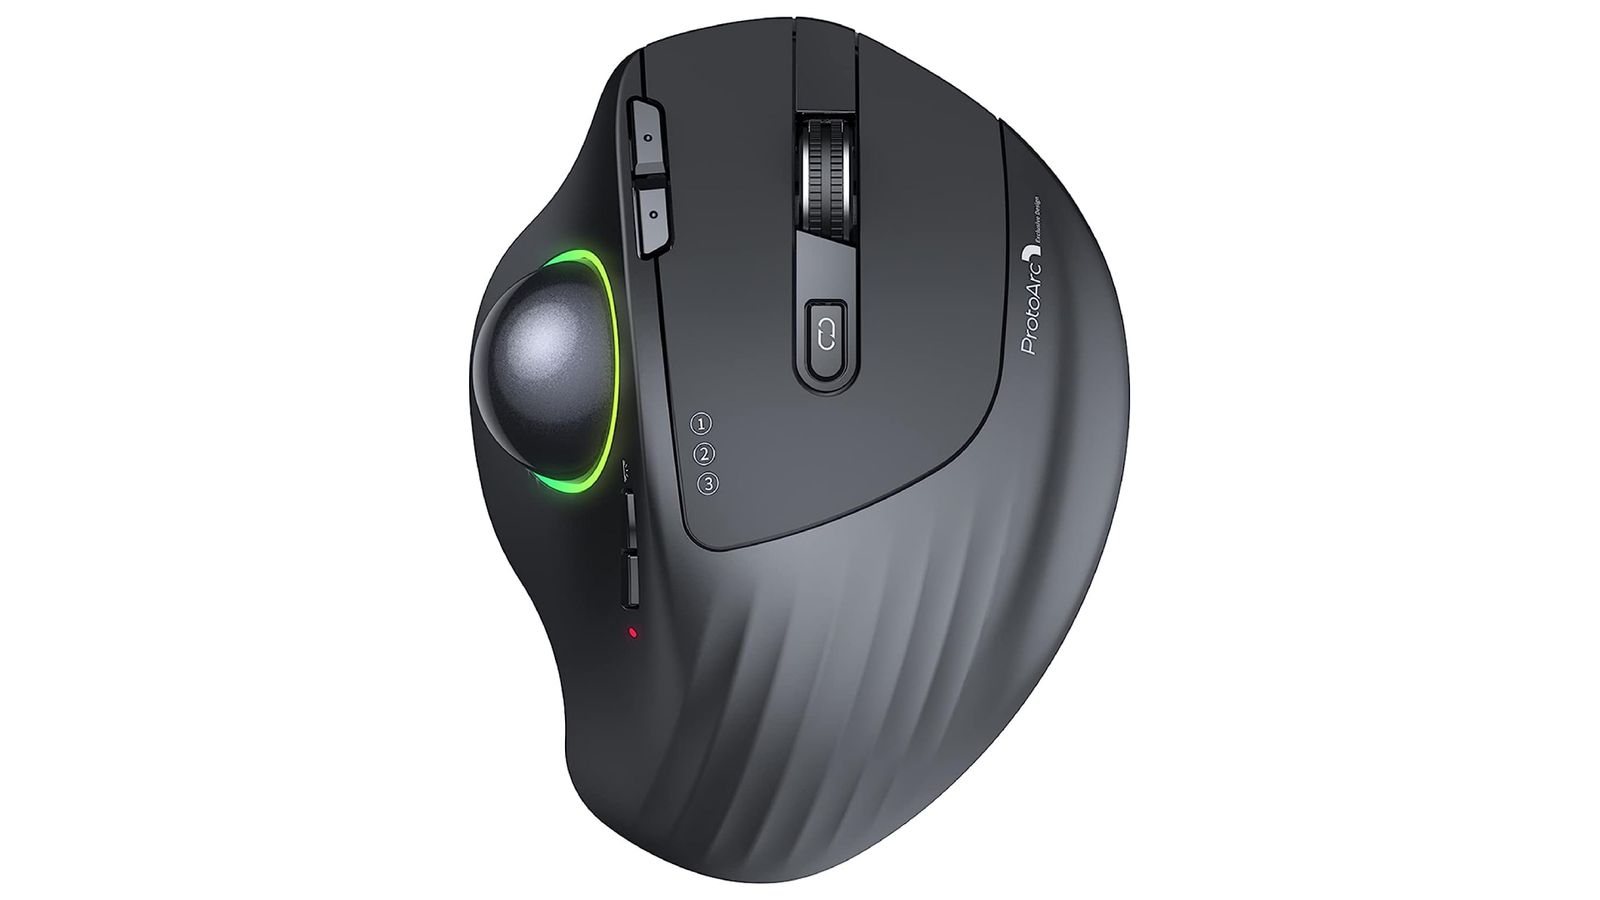 ProtoArc Trackball Mouse of a black mouse featuring a trackball on the left side surrounded by a green light.